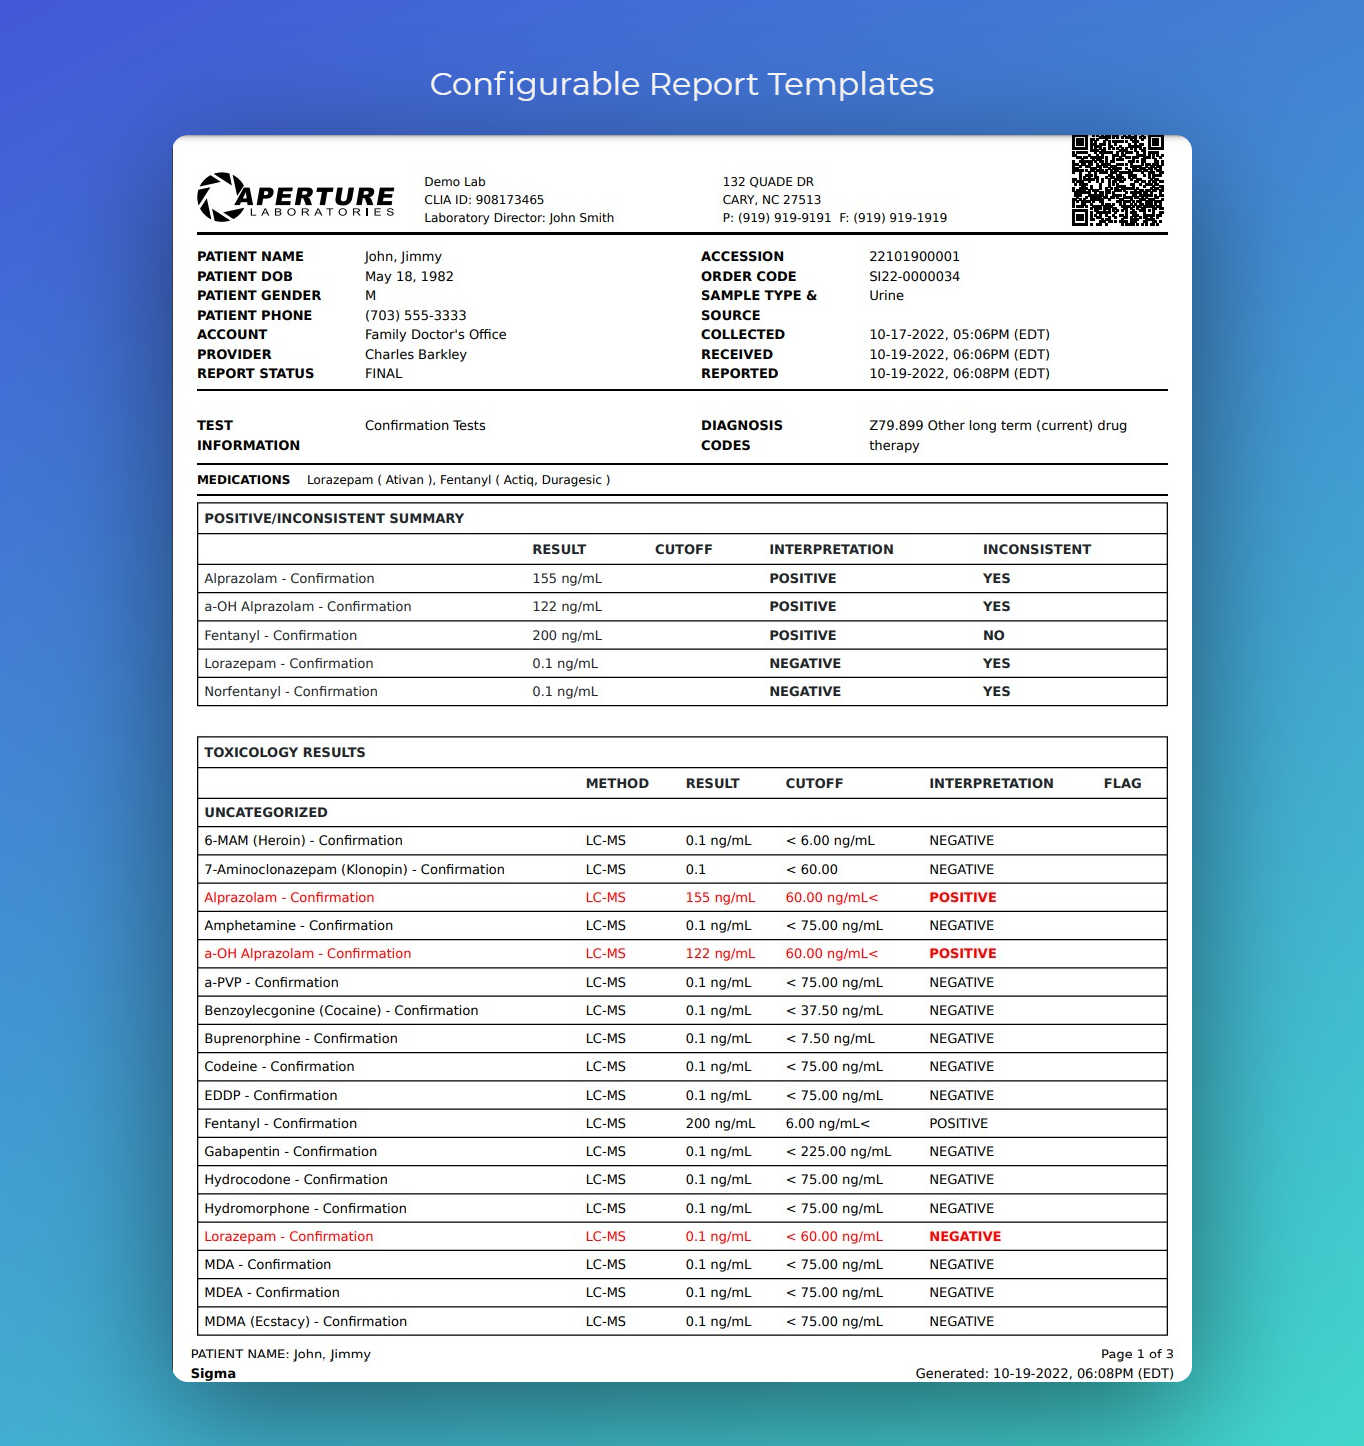 Configure report templates for qualitative and quantitative results. Configure the appearance of comments and critical results just the way that your clients like them.